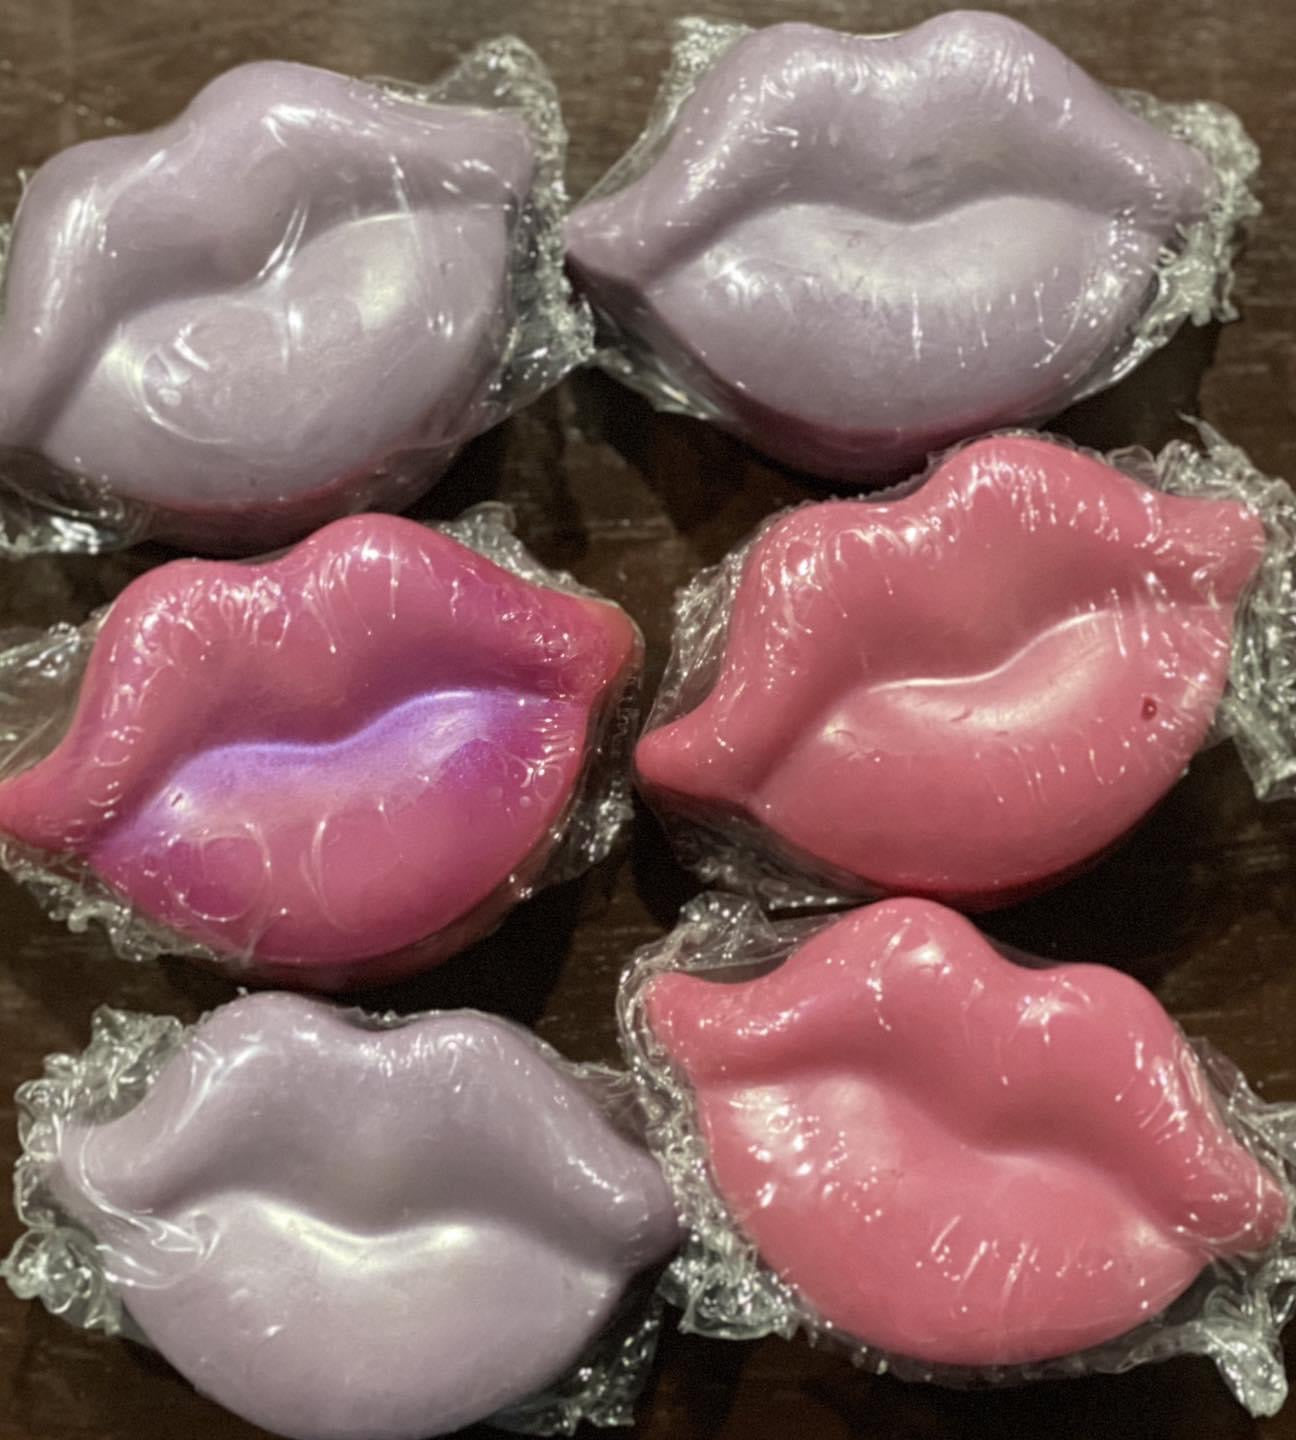 Sensual Moods Scented Wax Melts